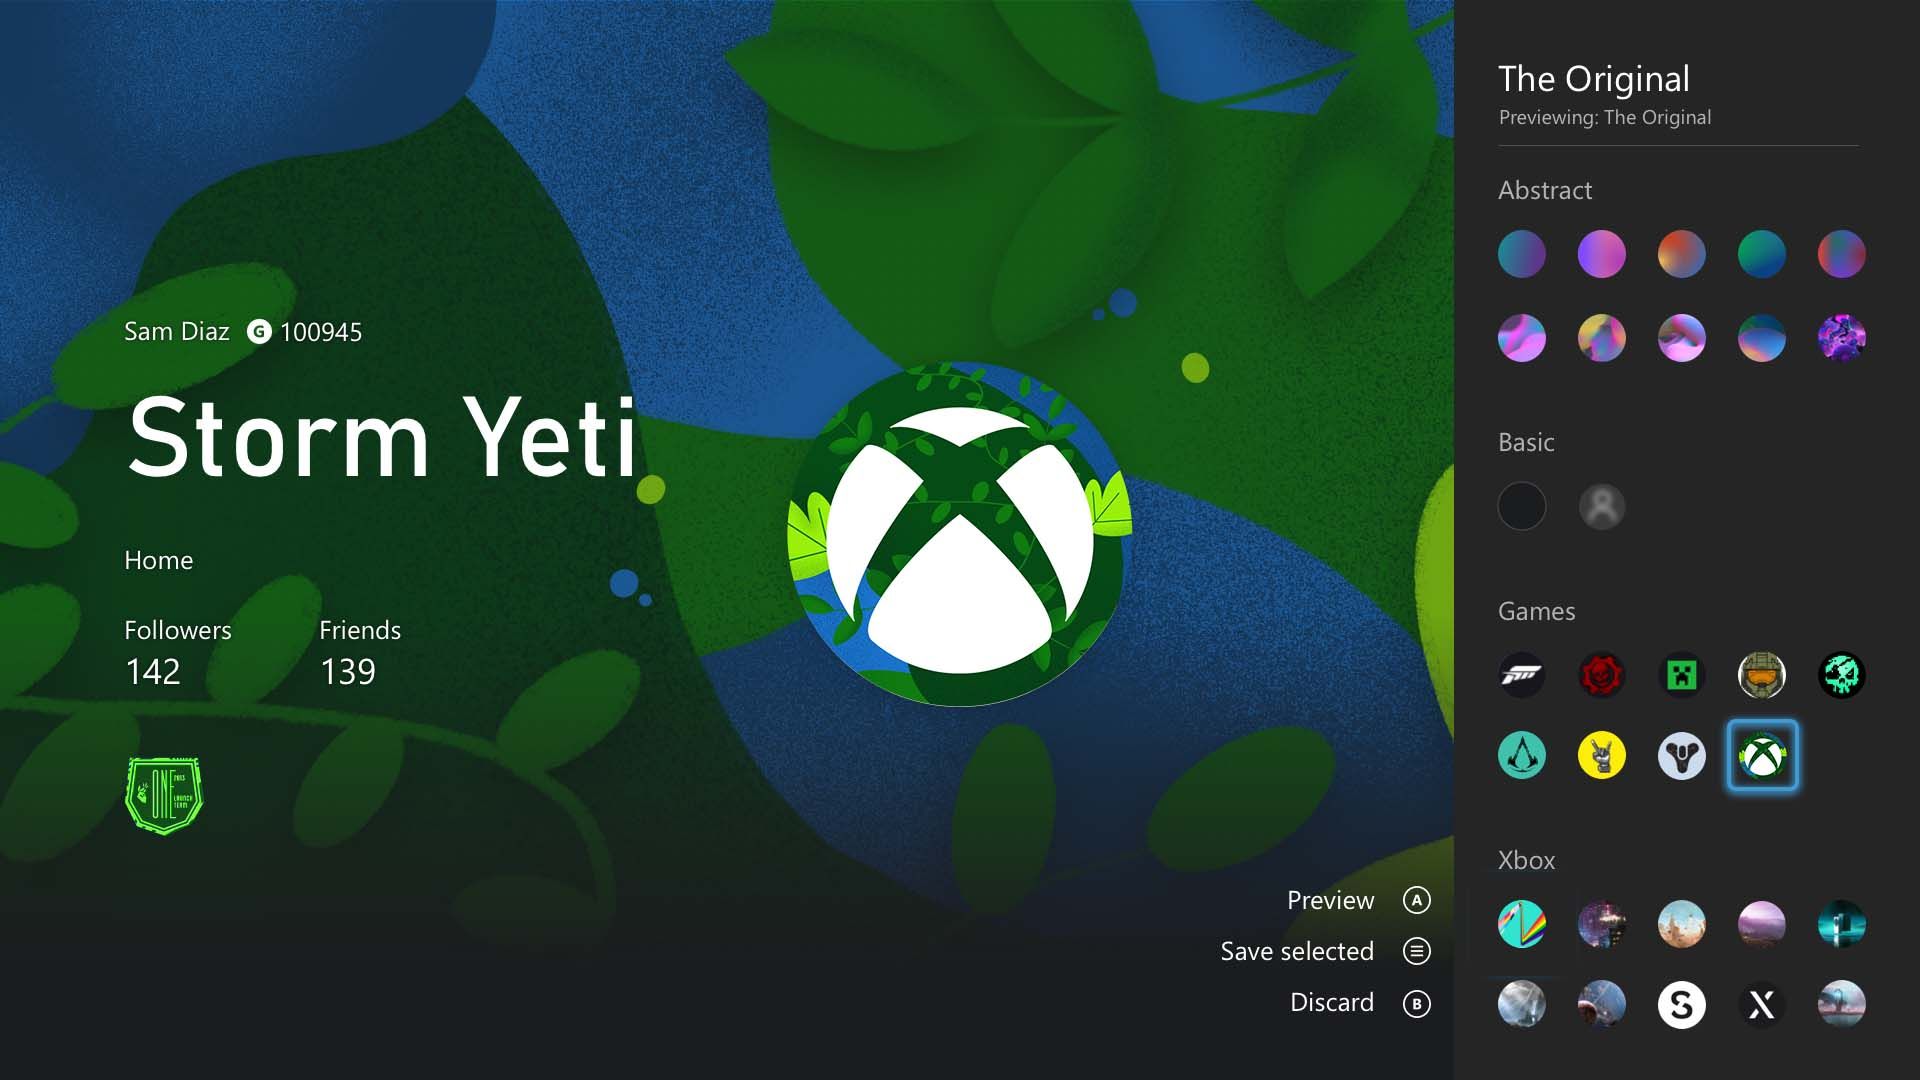 A screenshot of an Xbox profile using the Earth Day GamerPic and profile theme.